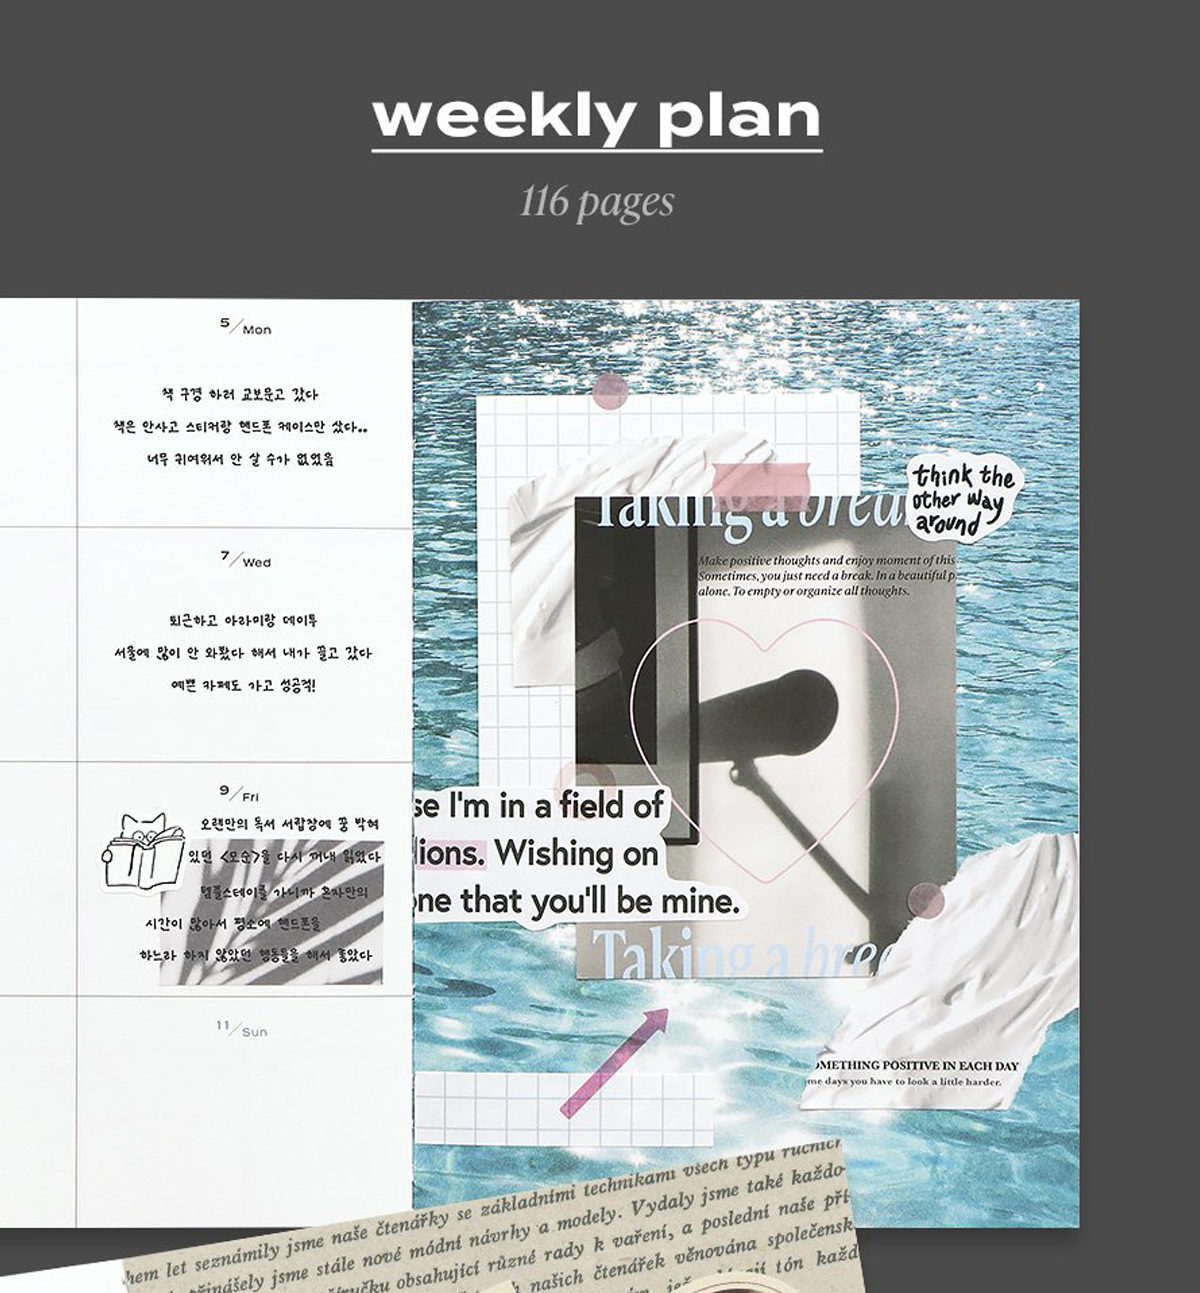 2024 MoodScape Weekly Planner